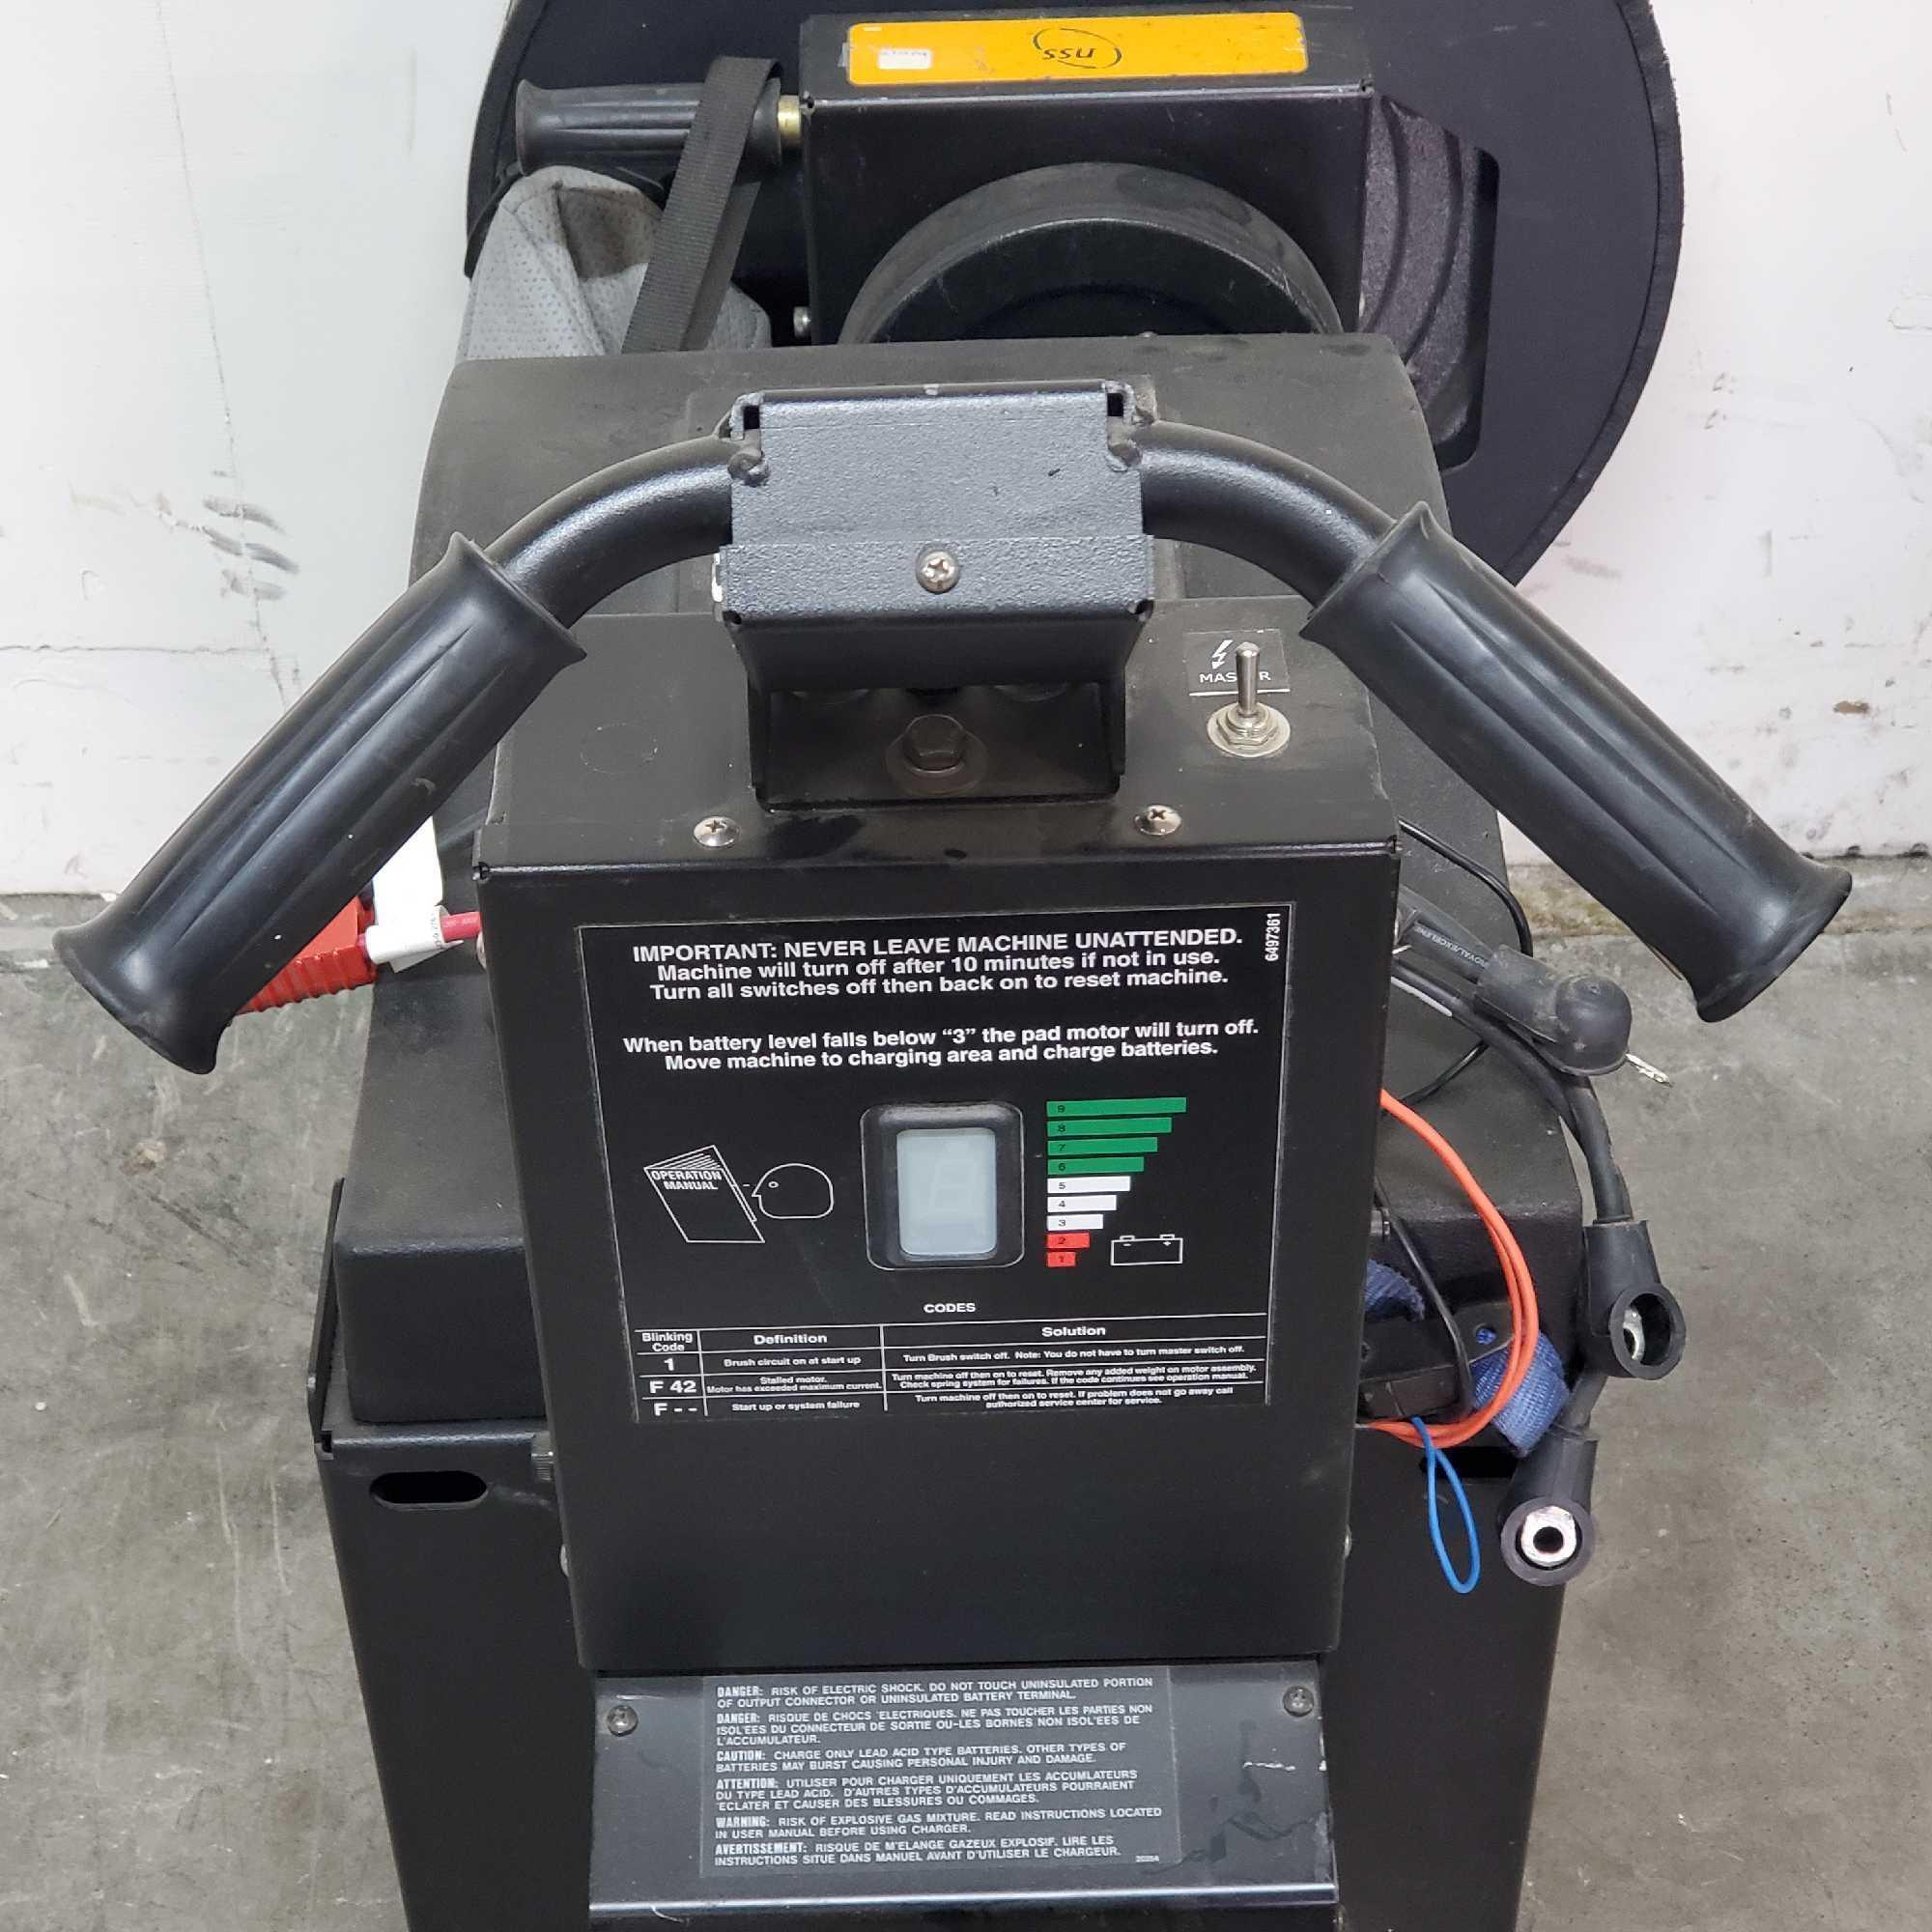 NSS Charger 2022 ABLT 20in pad walk-behind burnisher model 6402014 A